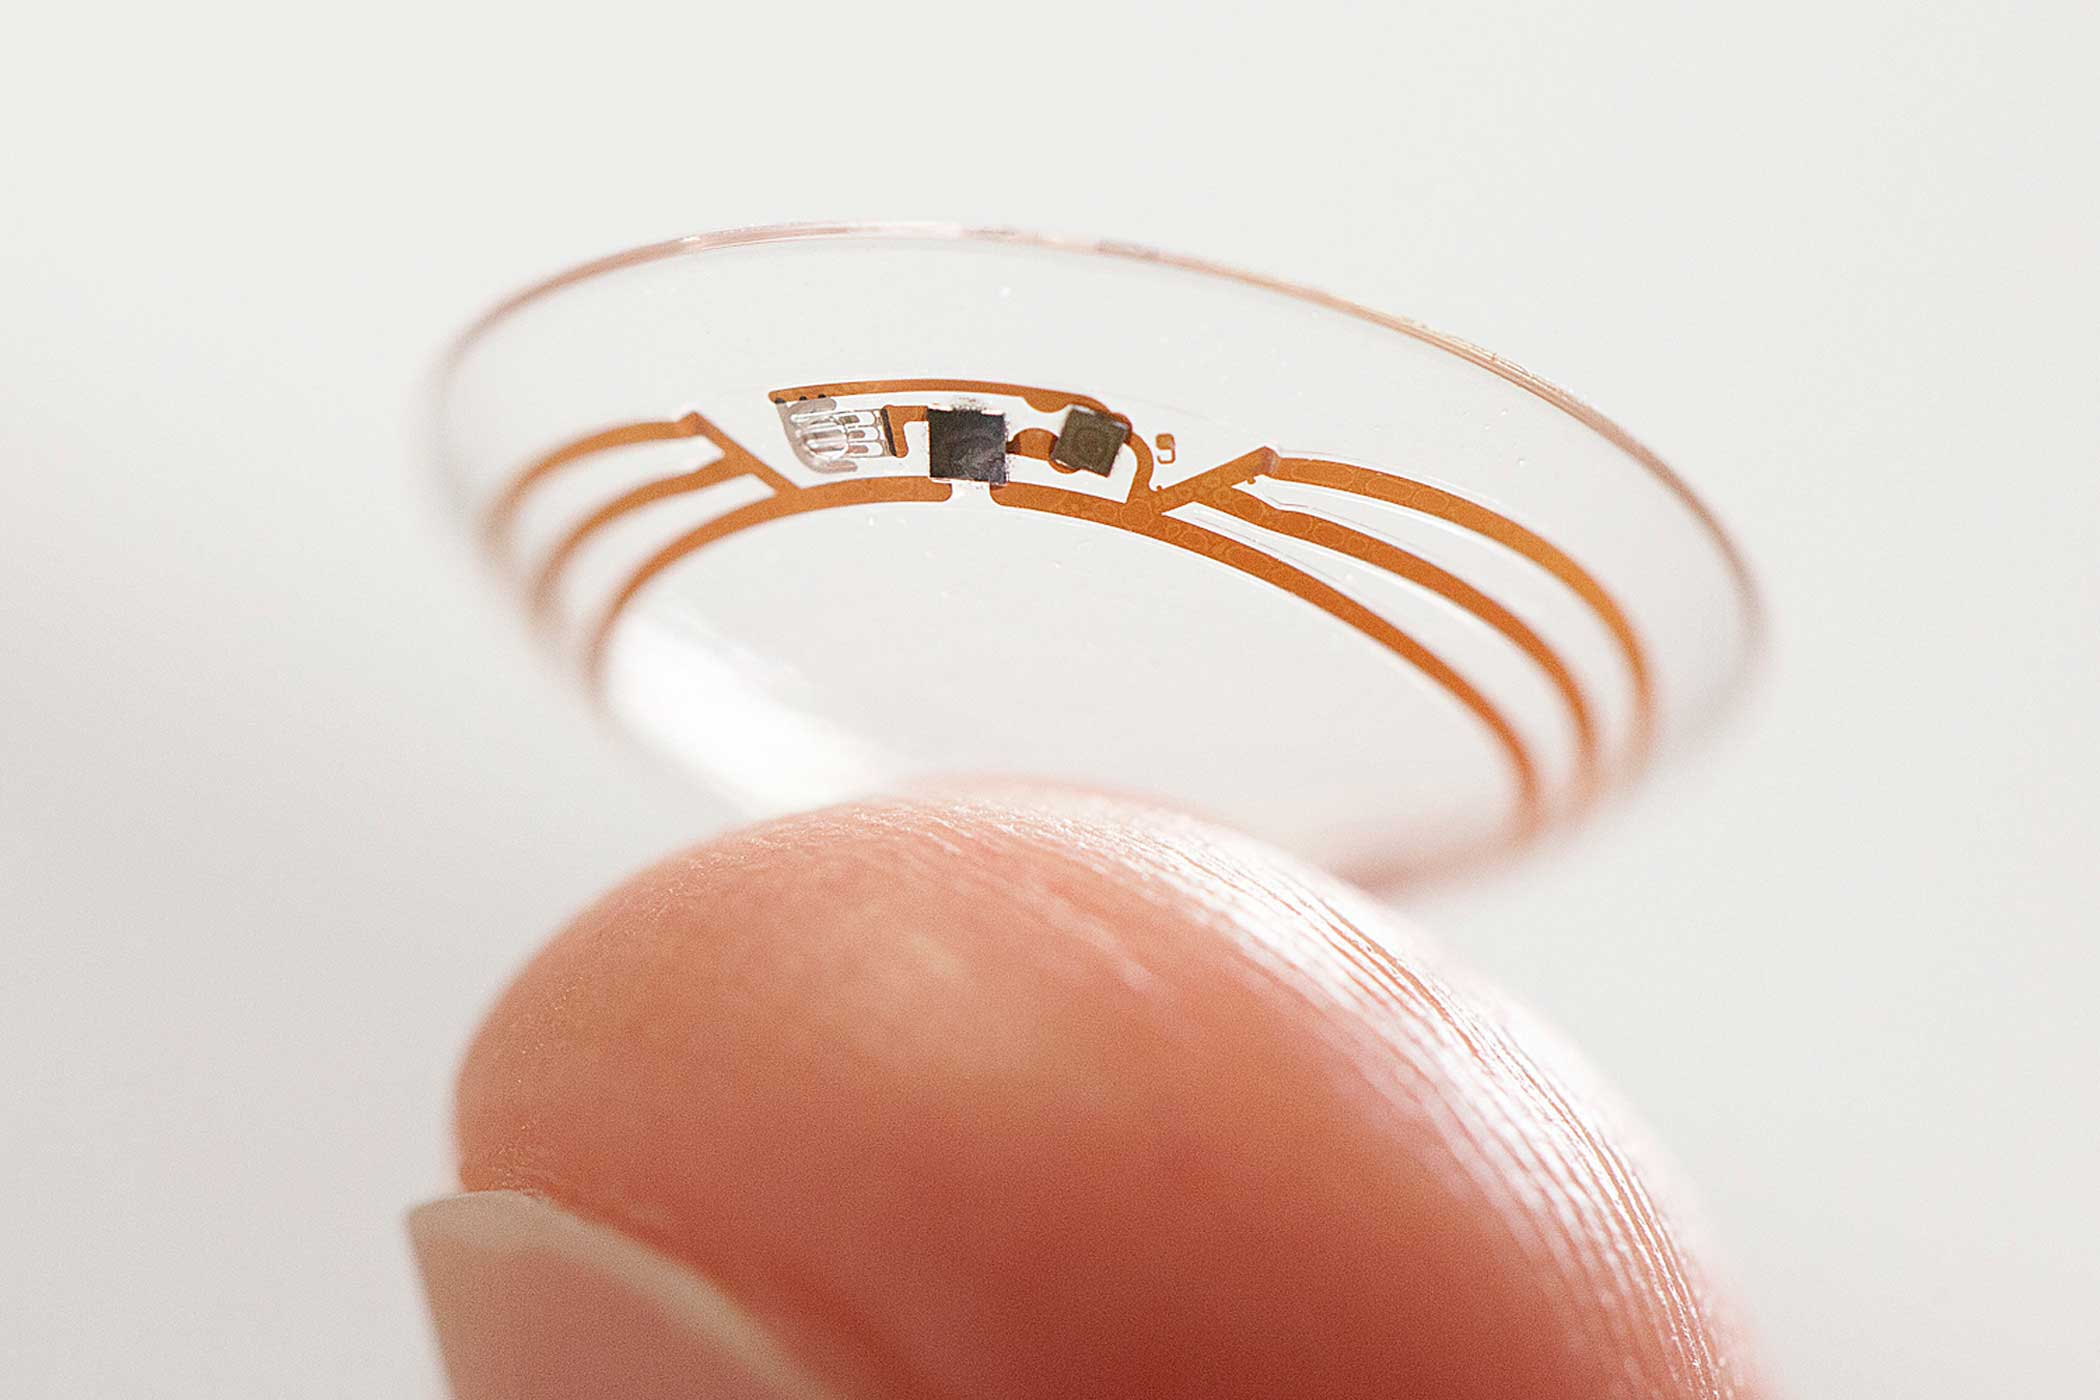 a contact lens Google is testing to explore tear glucose.